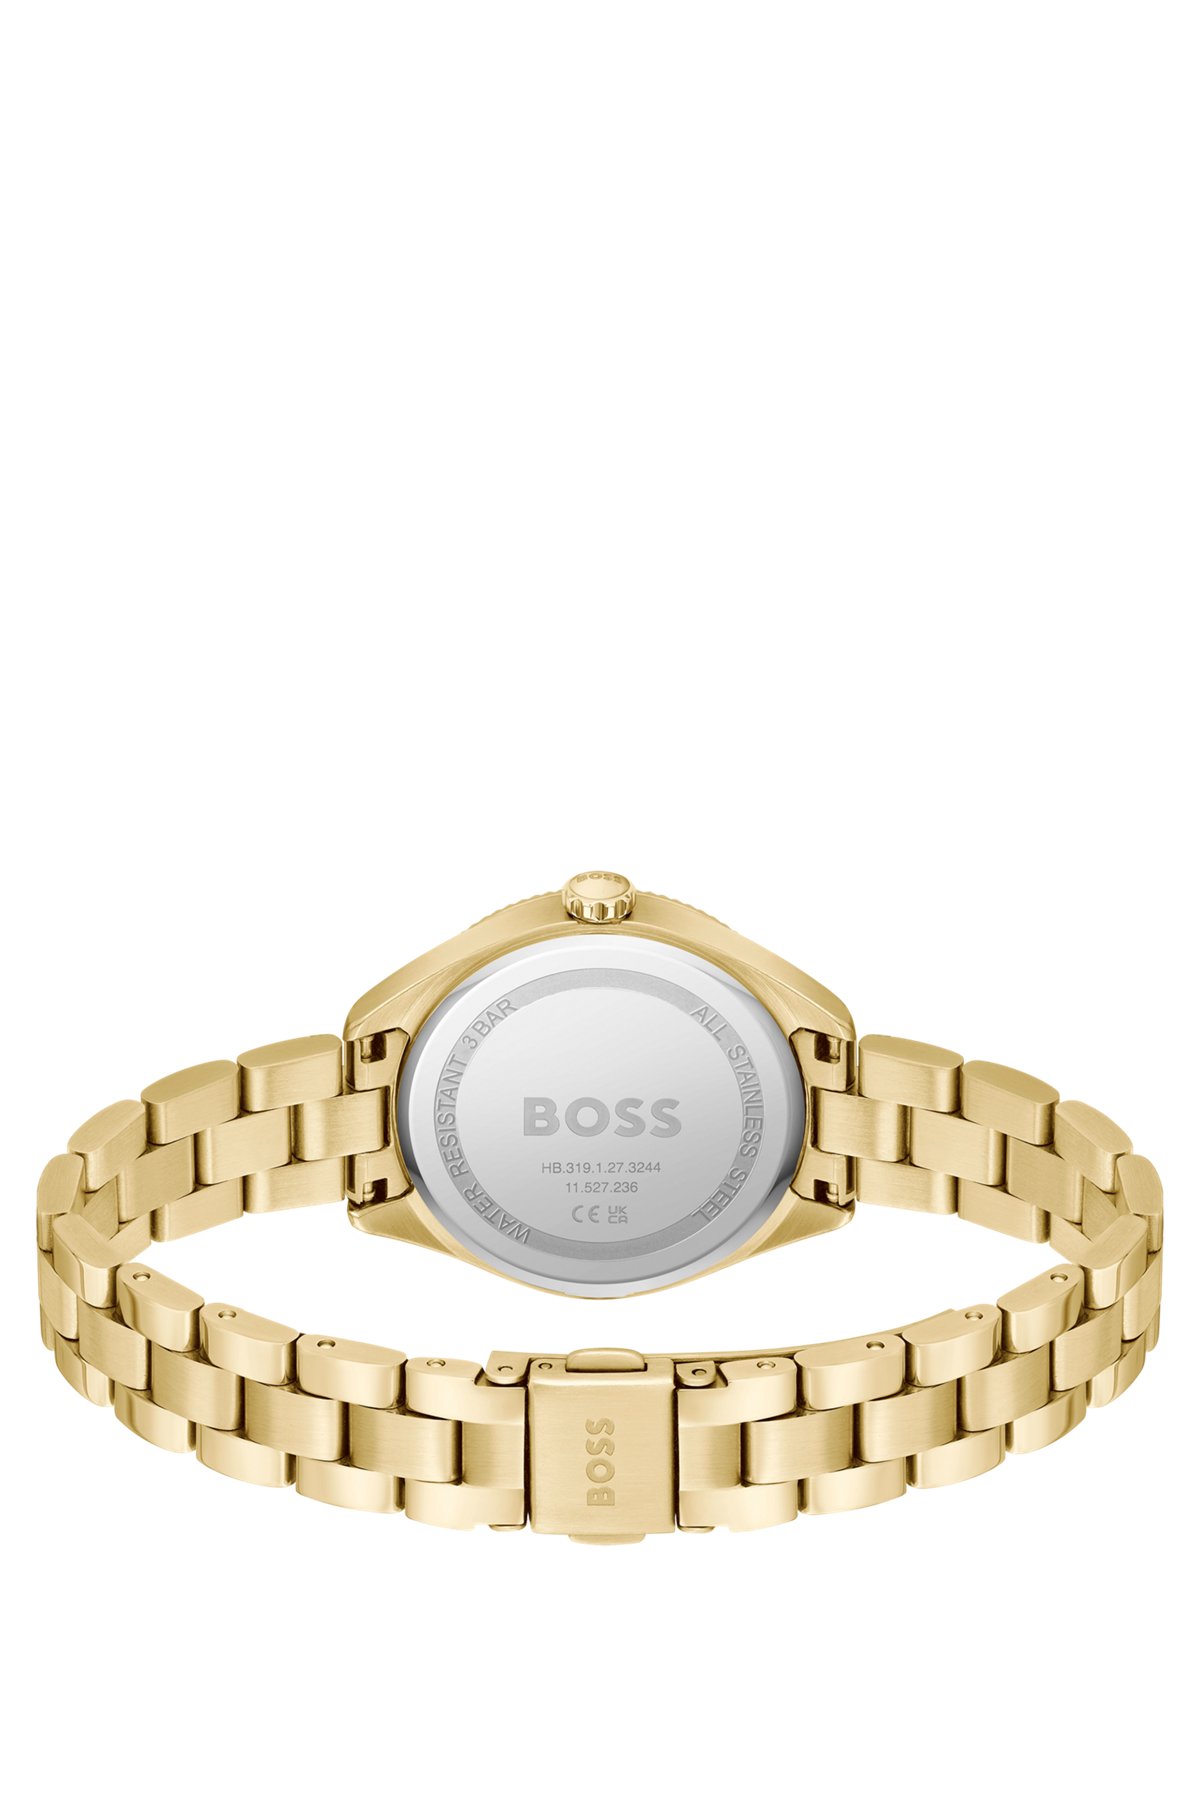 Gold-tone watch with green dial, Gold